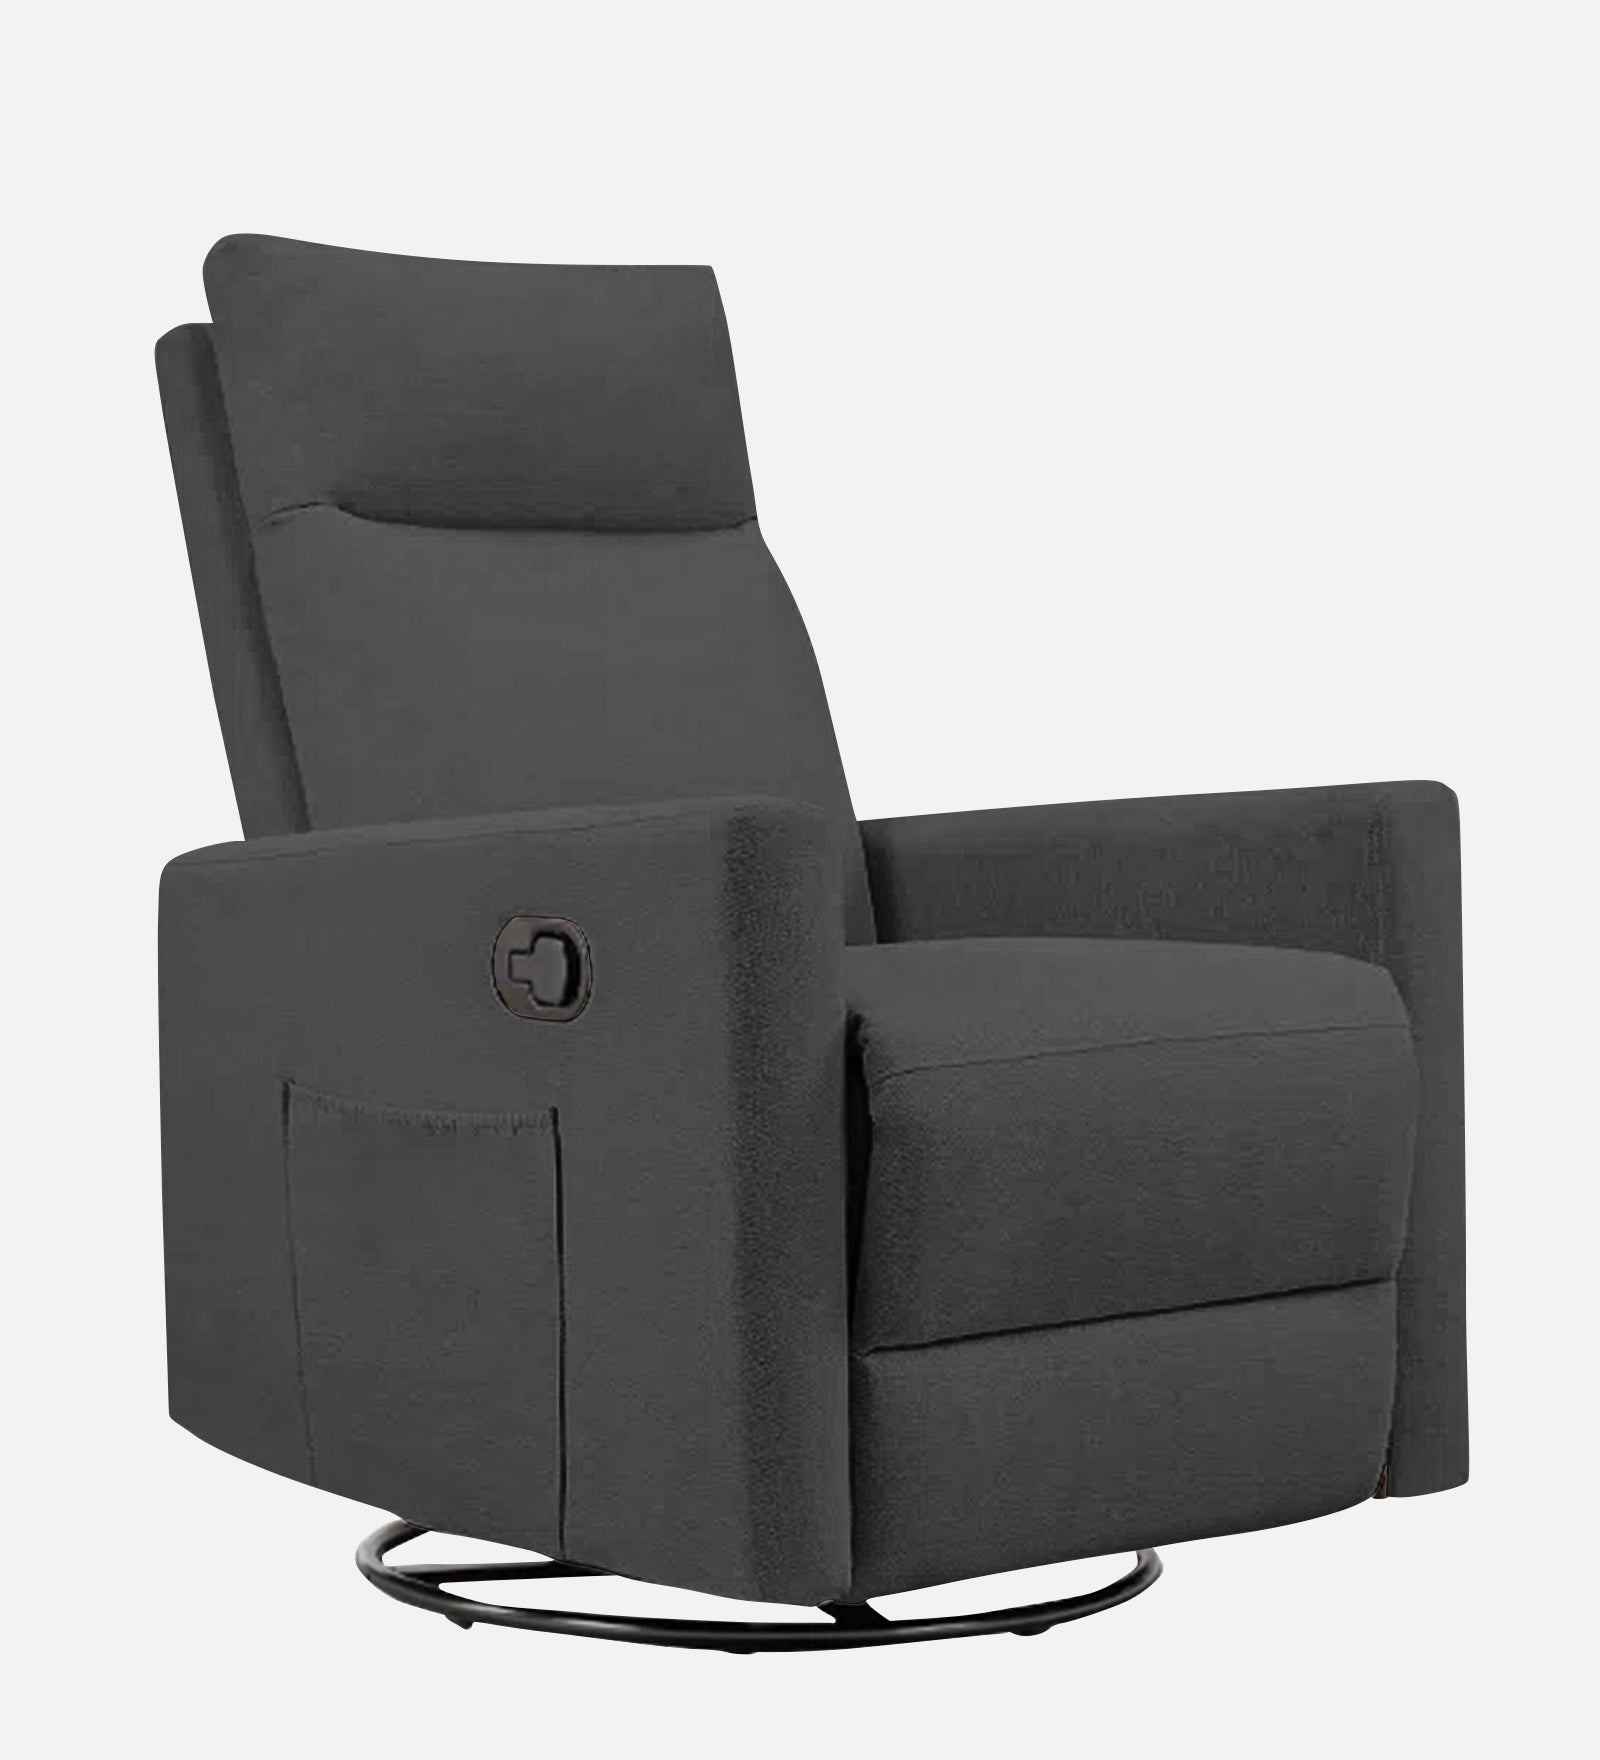 Zura Fabric Manual 1 Seater Recliner In Charcoal Grey Colour